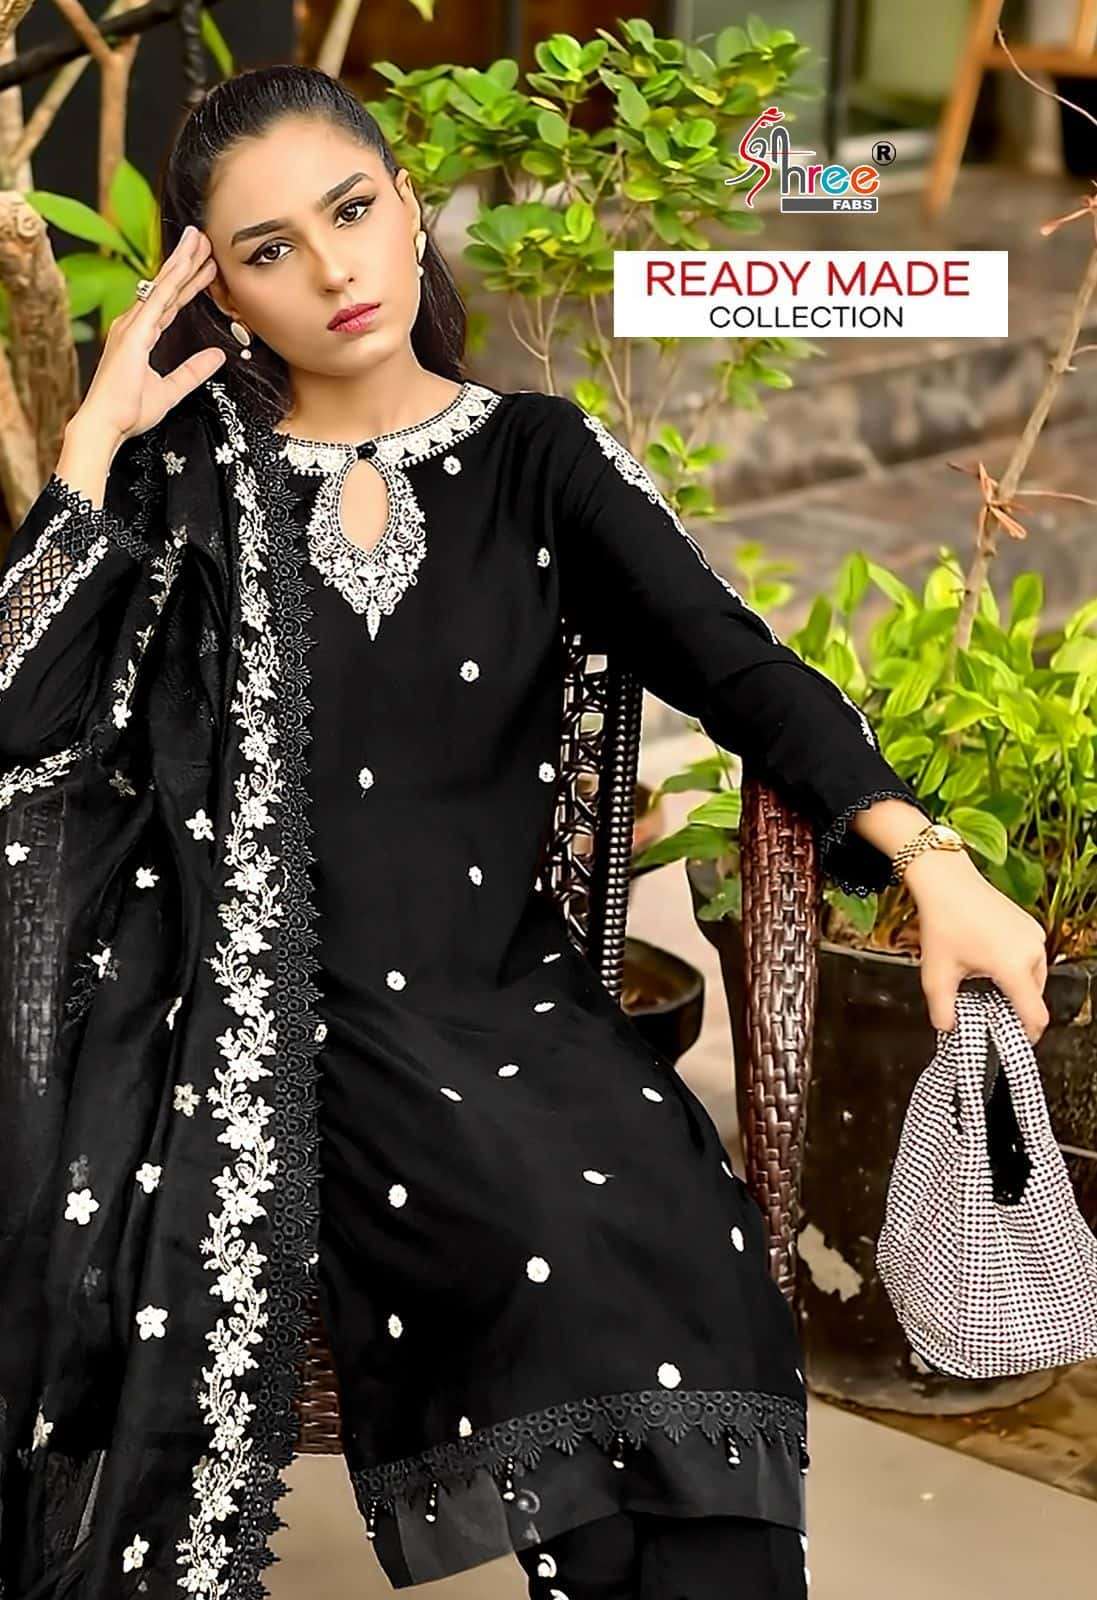 Shree Fabs R 1183 Colors Readymade Collection Festive Wear Salwar Suit Dealers 